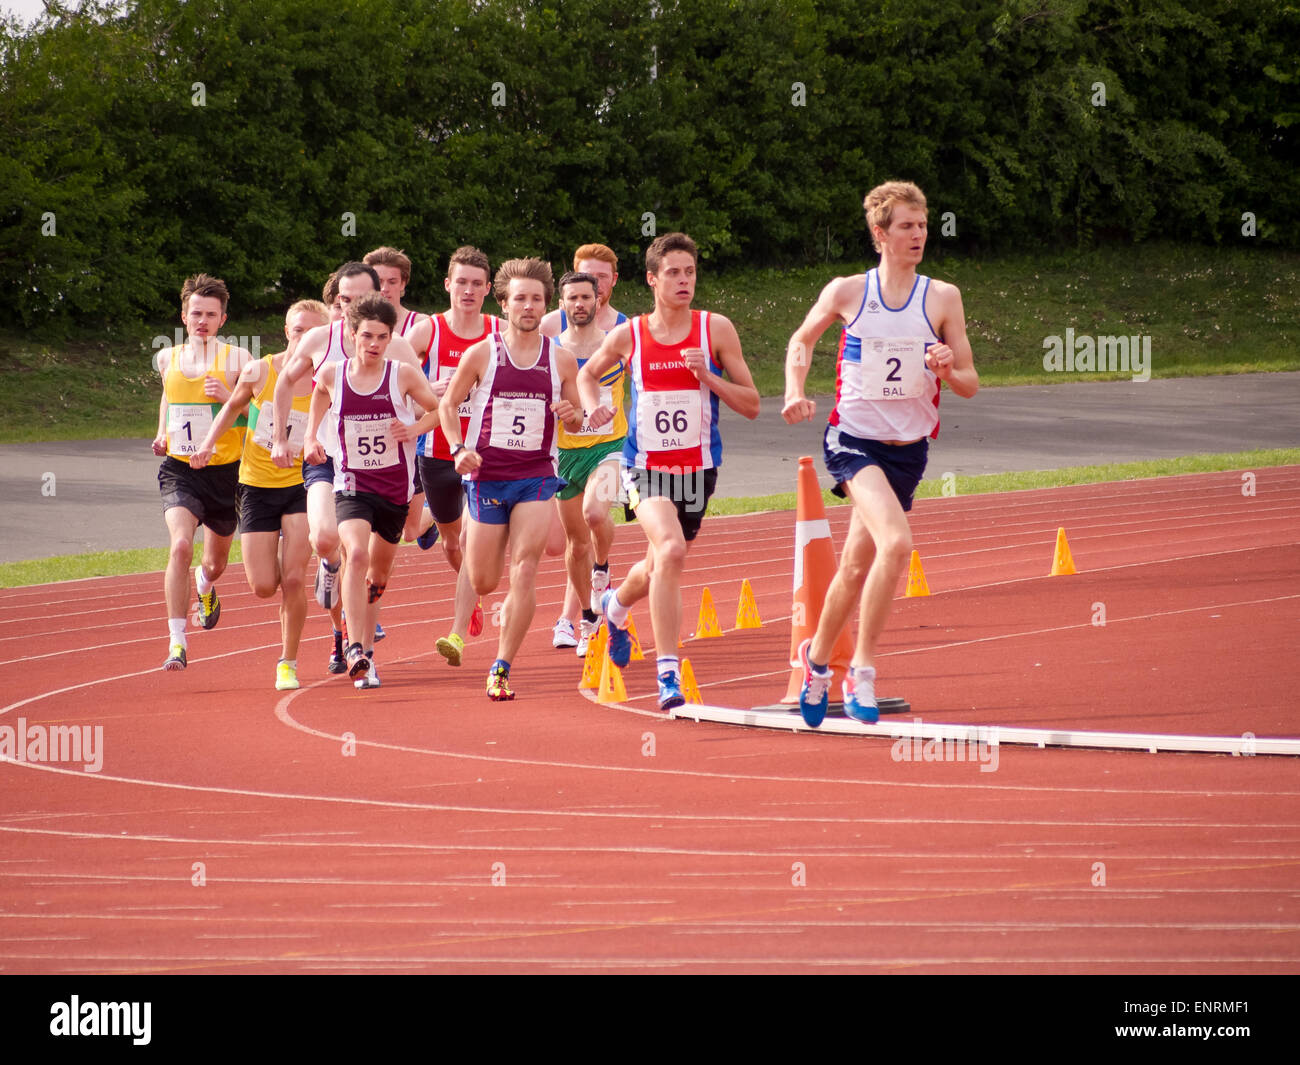 Alexander Teuten of the  City of Portsmouth Athletics club leads the pack during a 1500M race Stock Photo